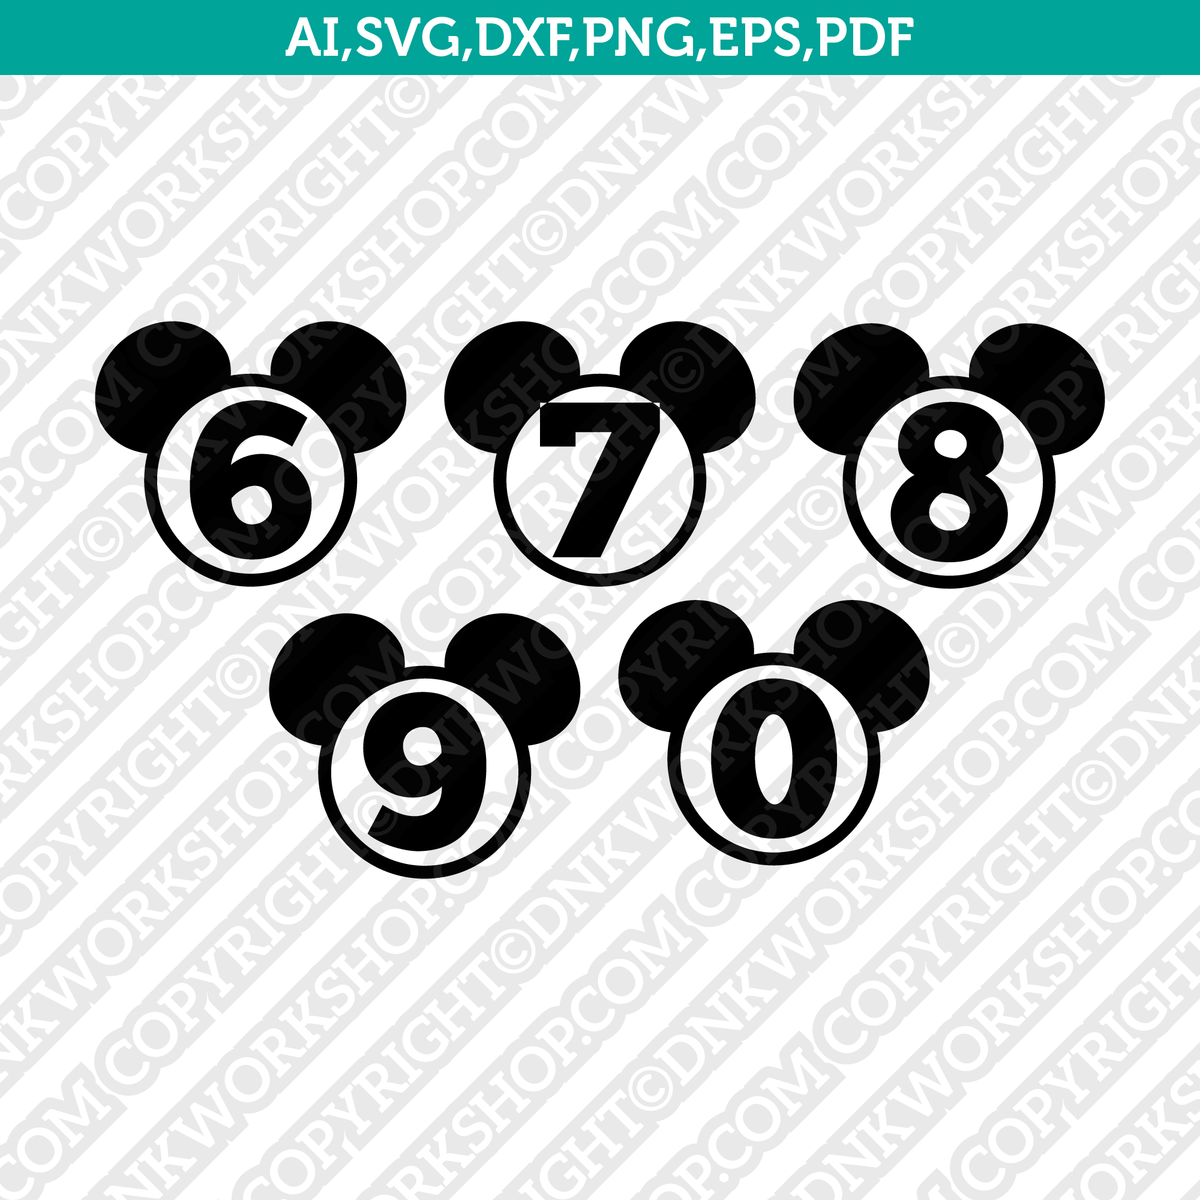 Mickey Mouse Numbers SVG, Mouse SVG, Cut File - Digital Download svg dxf  eps png pdf Design For Cricut or Silhouette Cut File Instant Vector